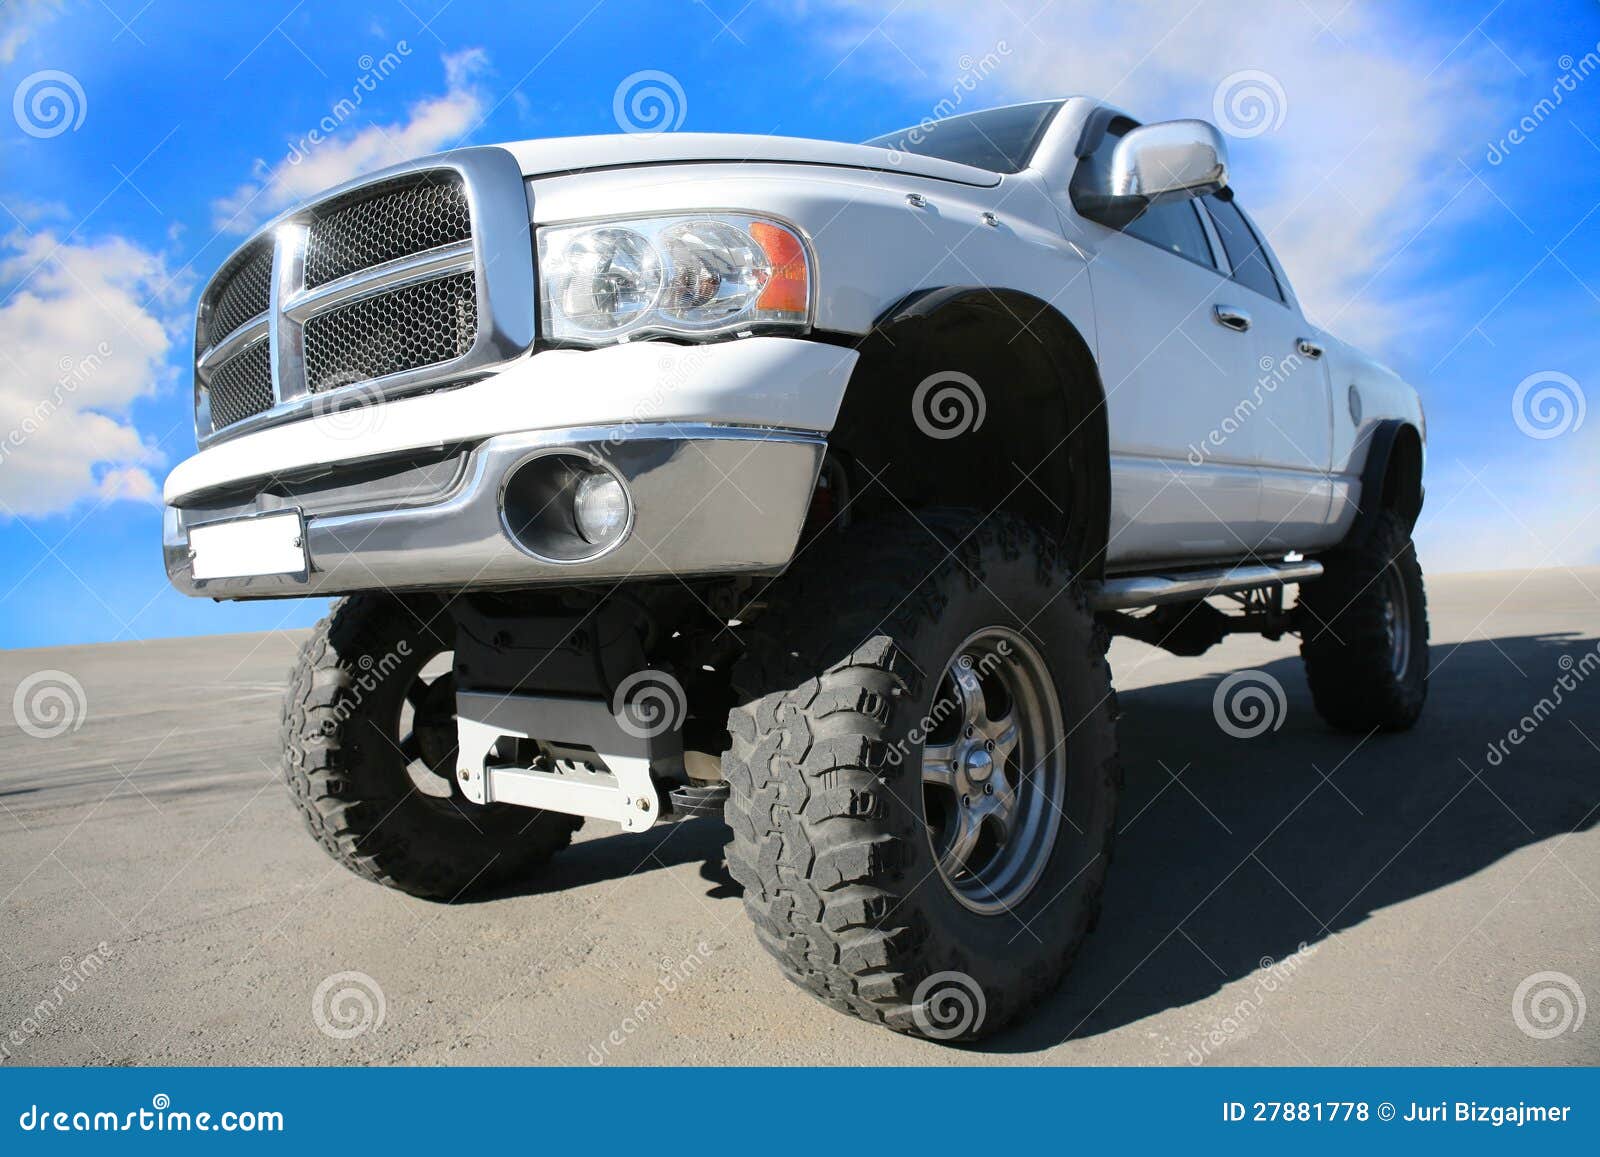 Offroad Car On The Big Wheels Stock Photo  Image: 27881778